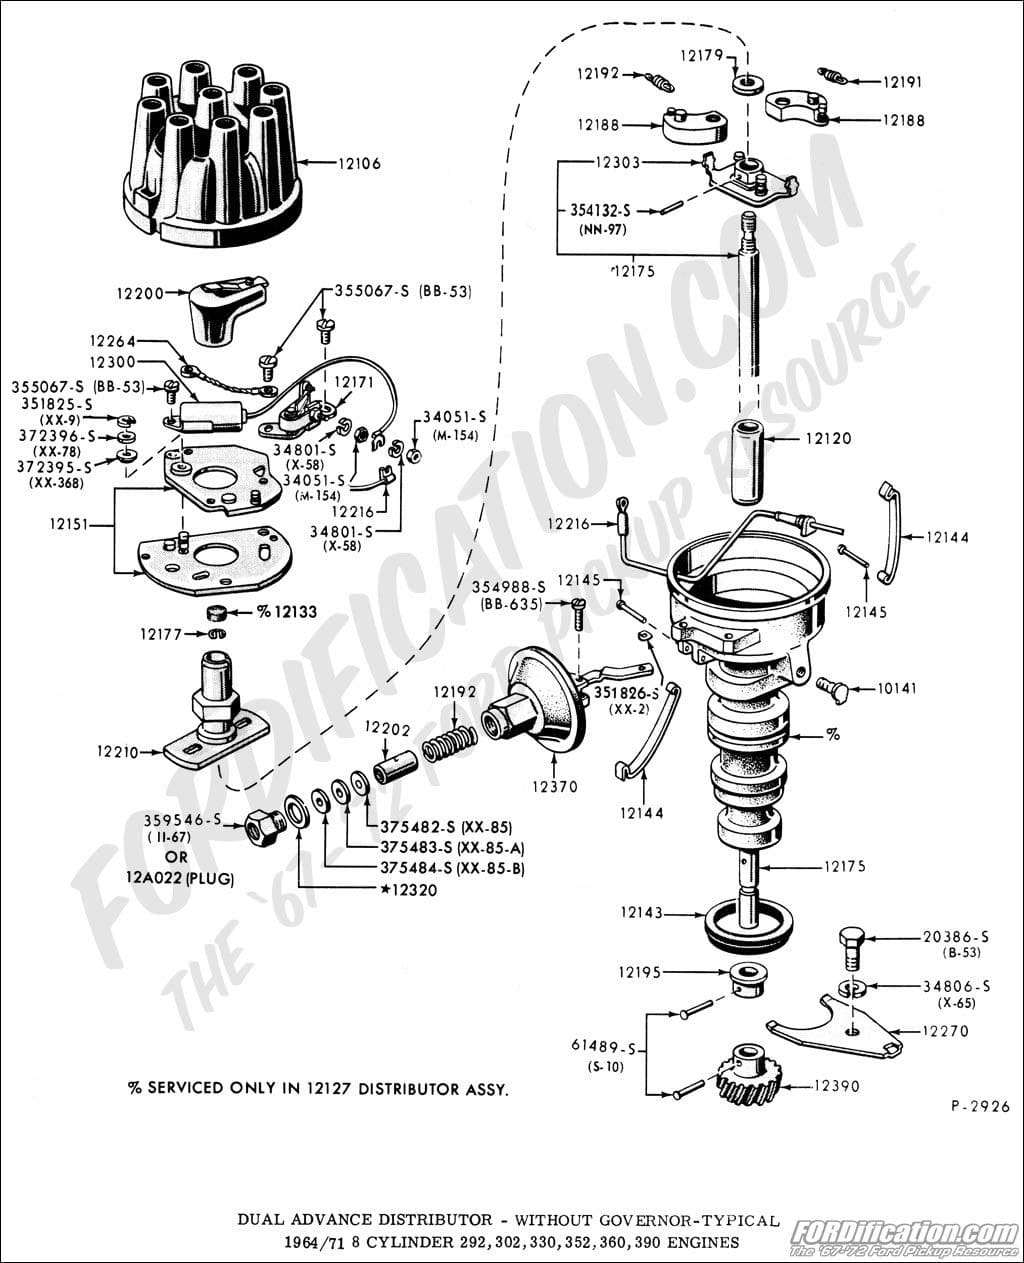 Steel Vacuum Line Part #? - Ford Truck Enthusiasts Forums 1966 mgb wiring diagram schematic 